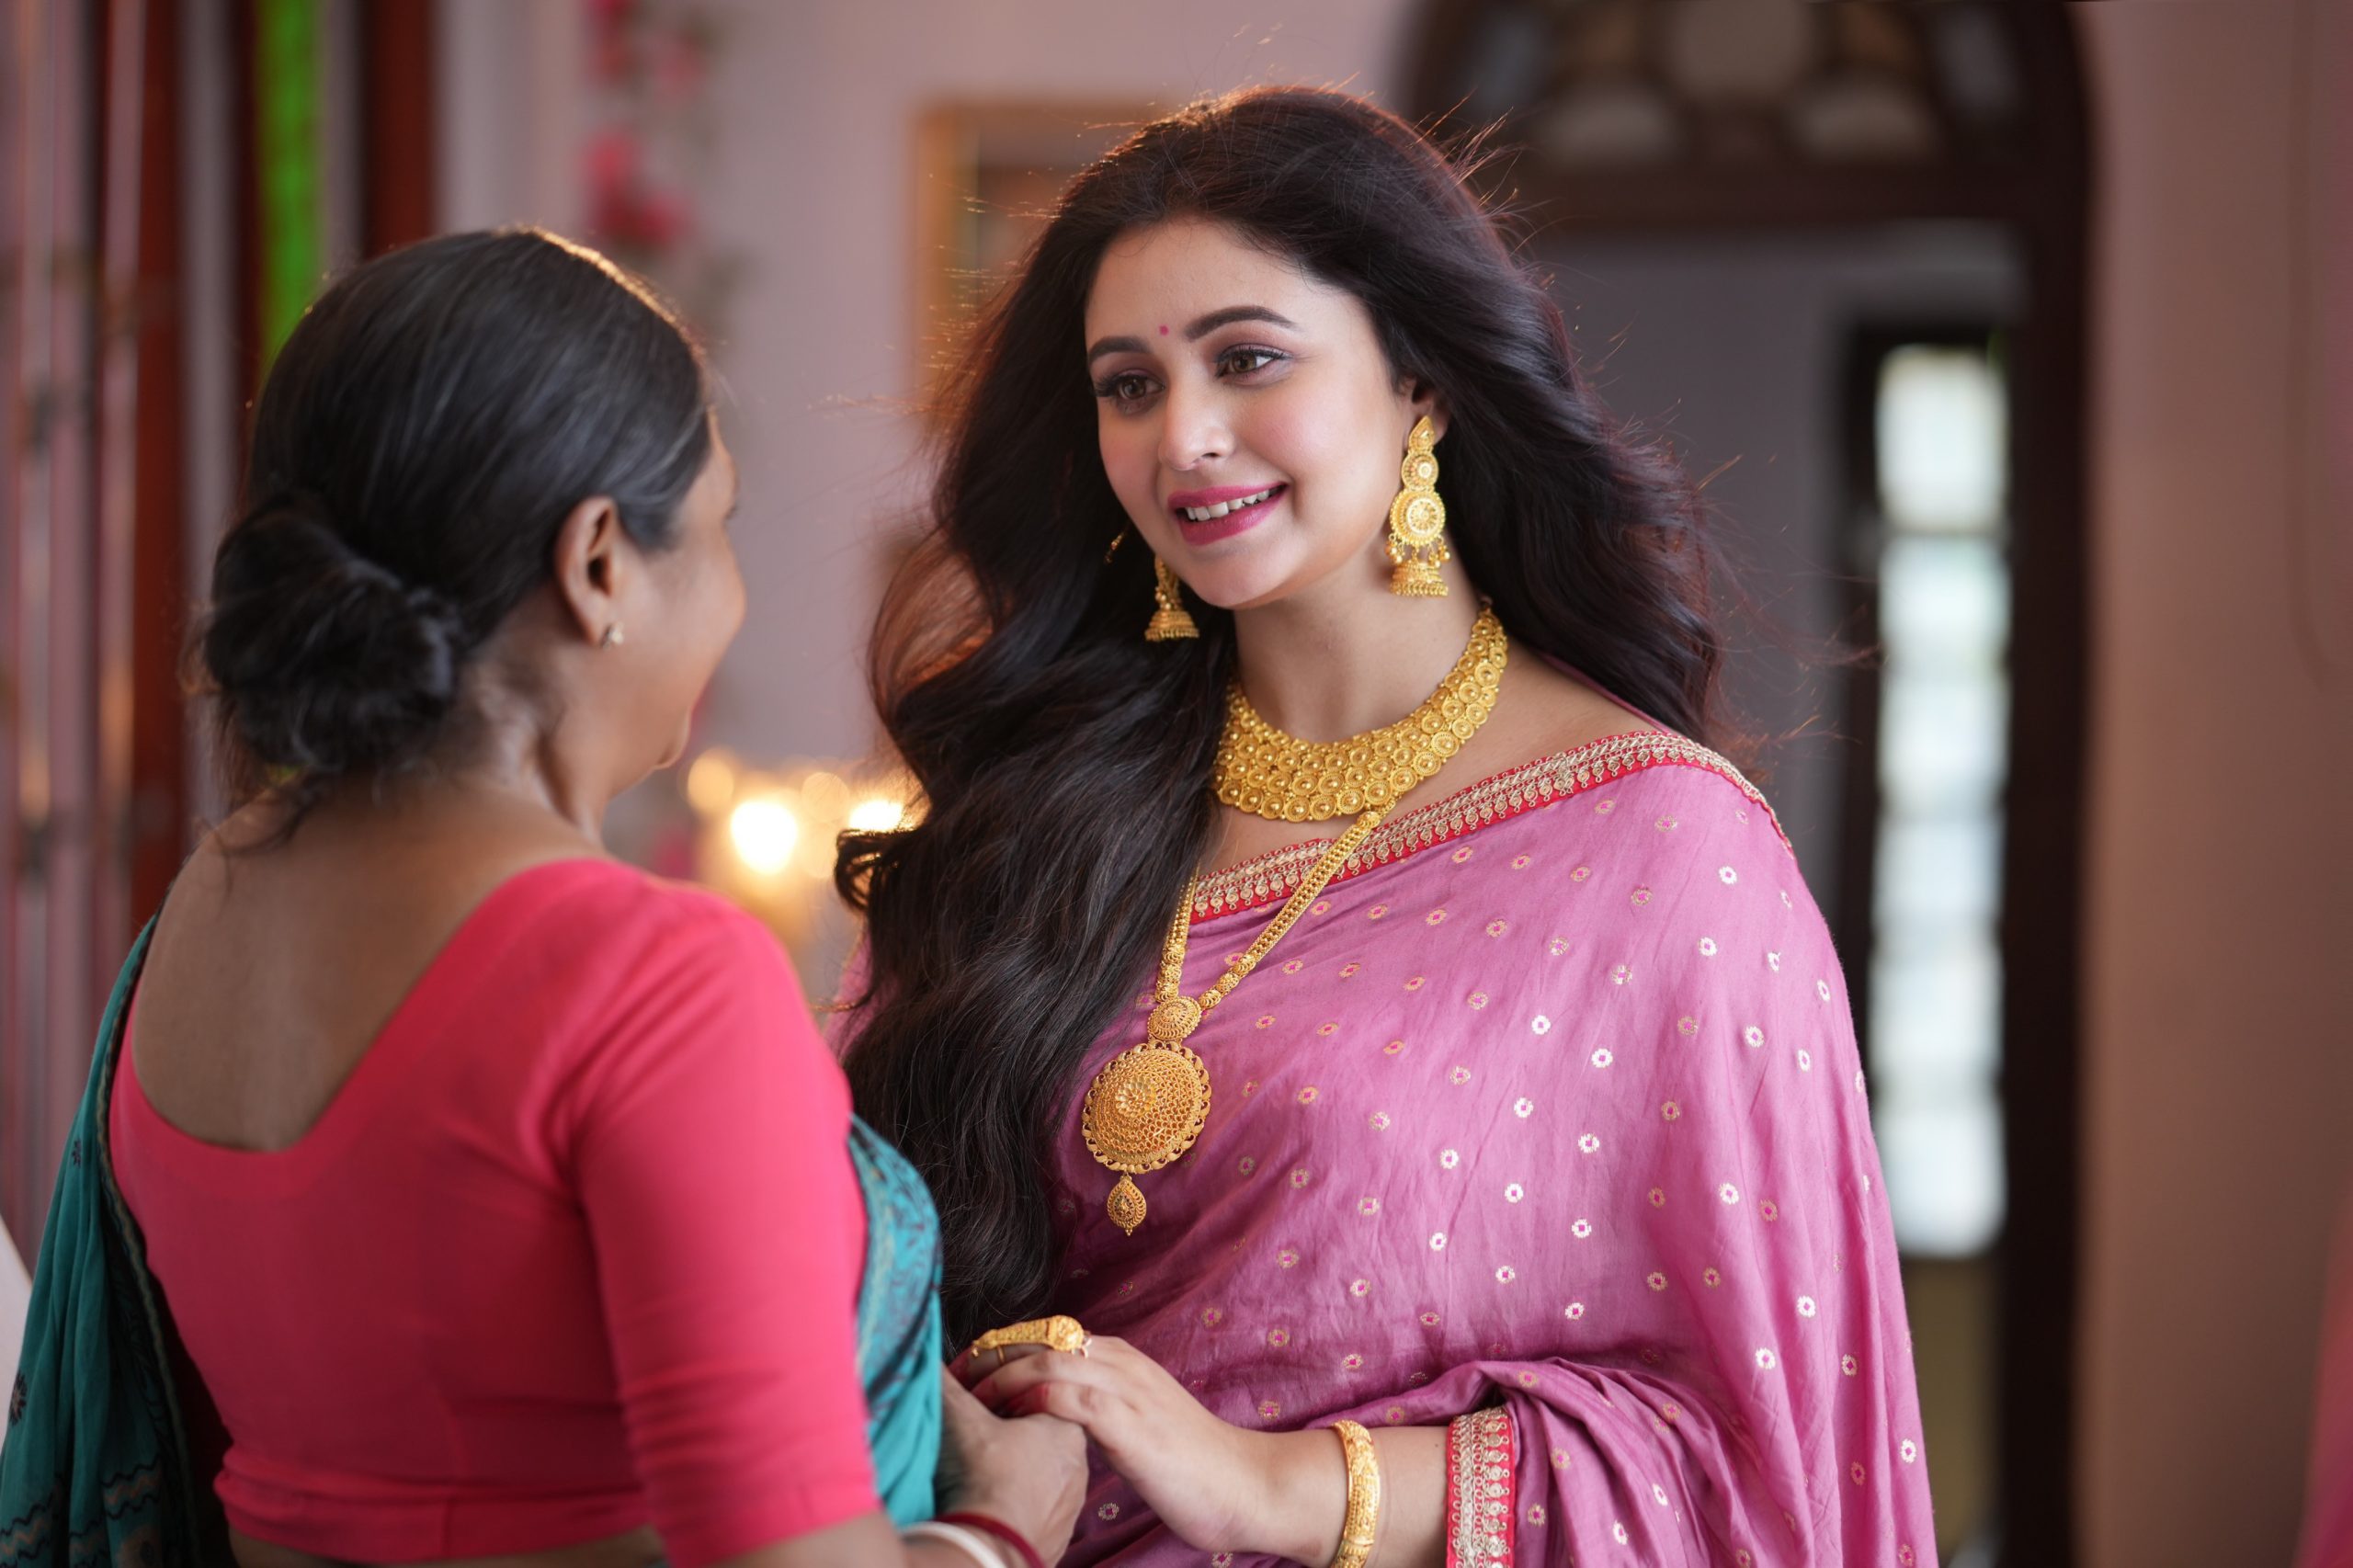 Kalyan Jewellers celebrates the divine feminine with a Durga Pujo special campaign